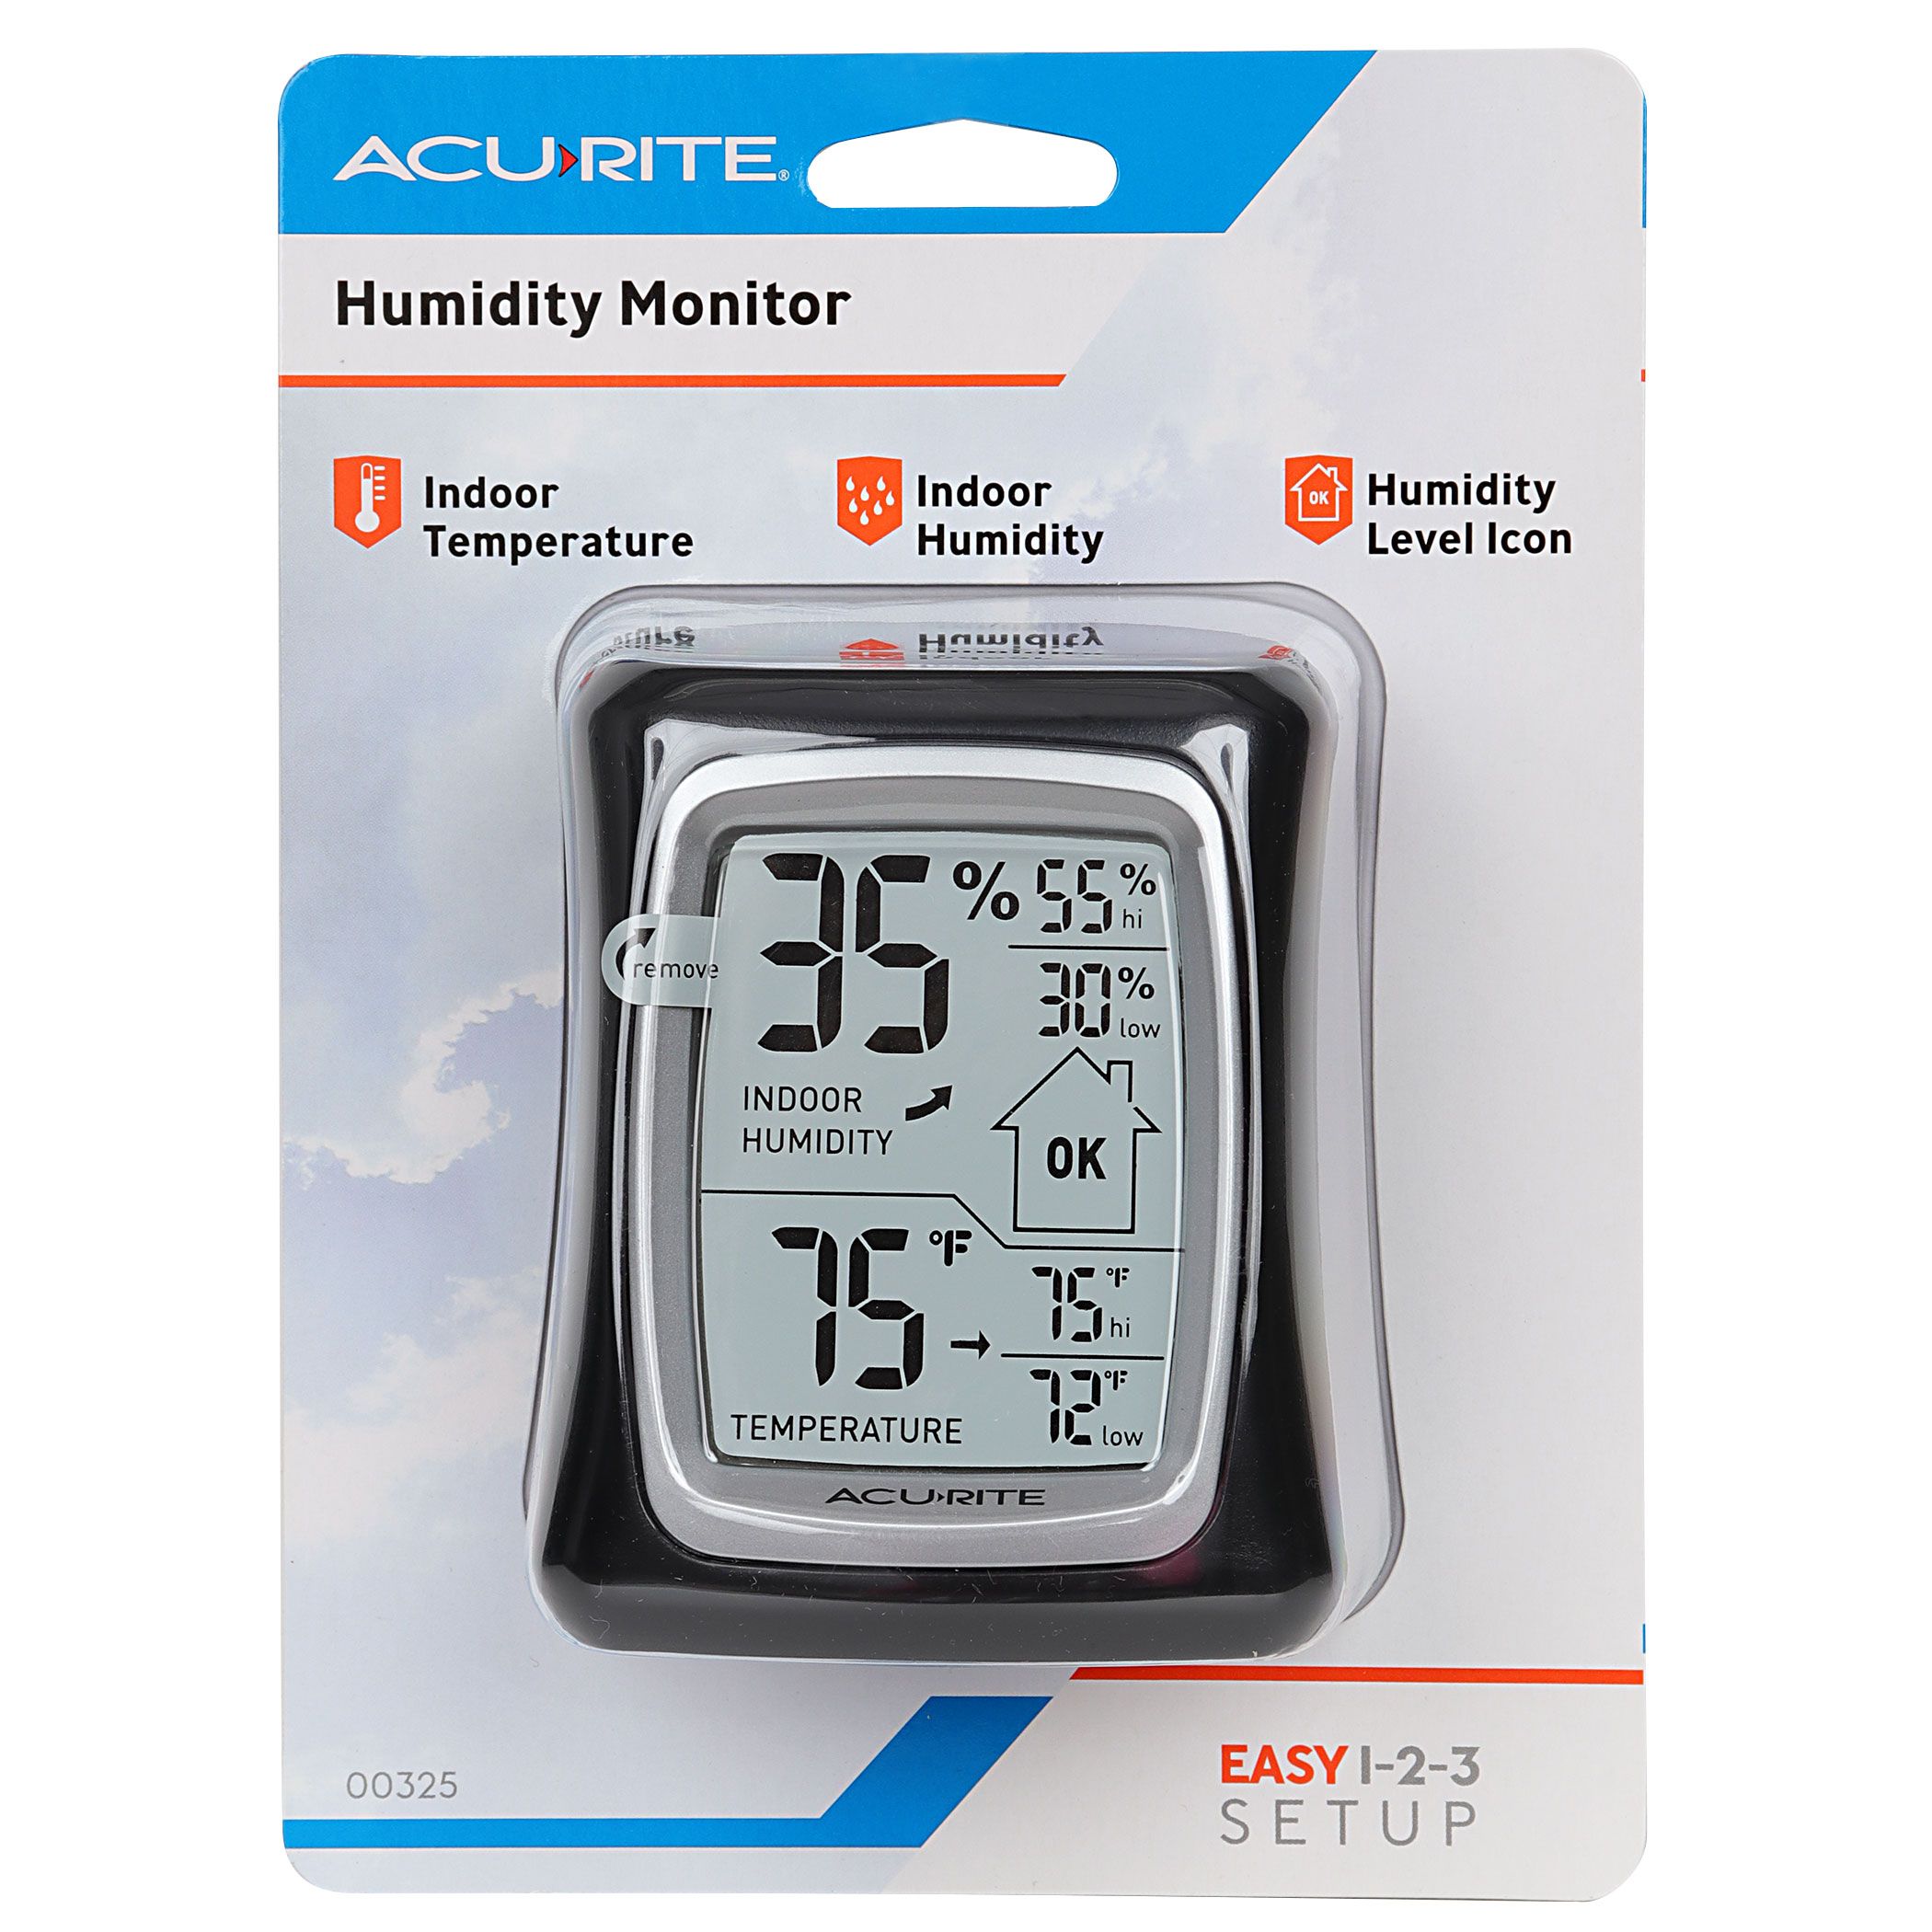 AcuRite 01080M Pro Accuracy Temperature and Humidity Gauge with Alarms Black